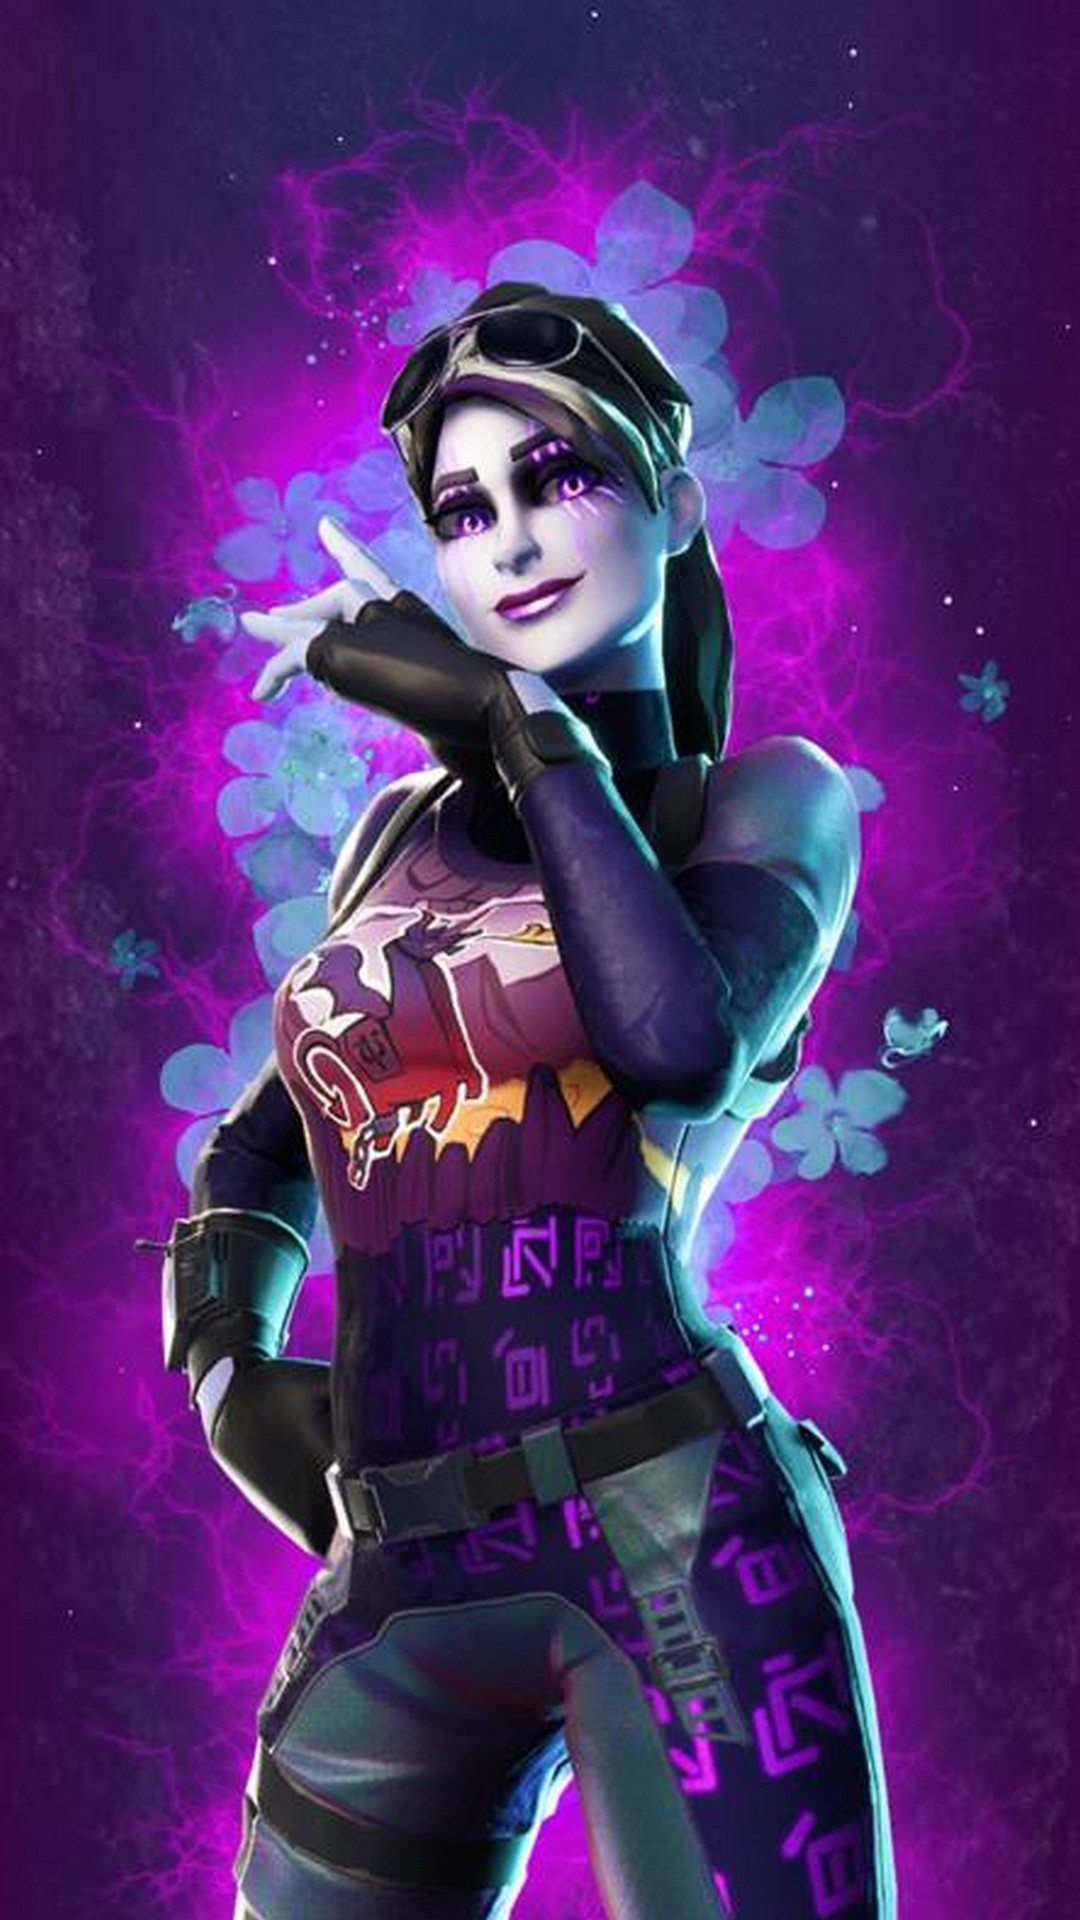 Fortnite iPhone Wallpaper in HD with high-resolution 1080x1920 pixel. You can set as wallpaper for Apple iPhone X, XS Max, XR, 8, 7, 6, SE, iPad. Enjoy and share your favorite HD wallpapers and background images